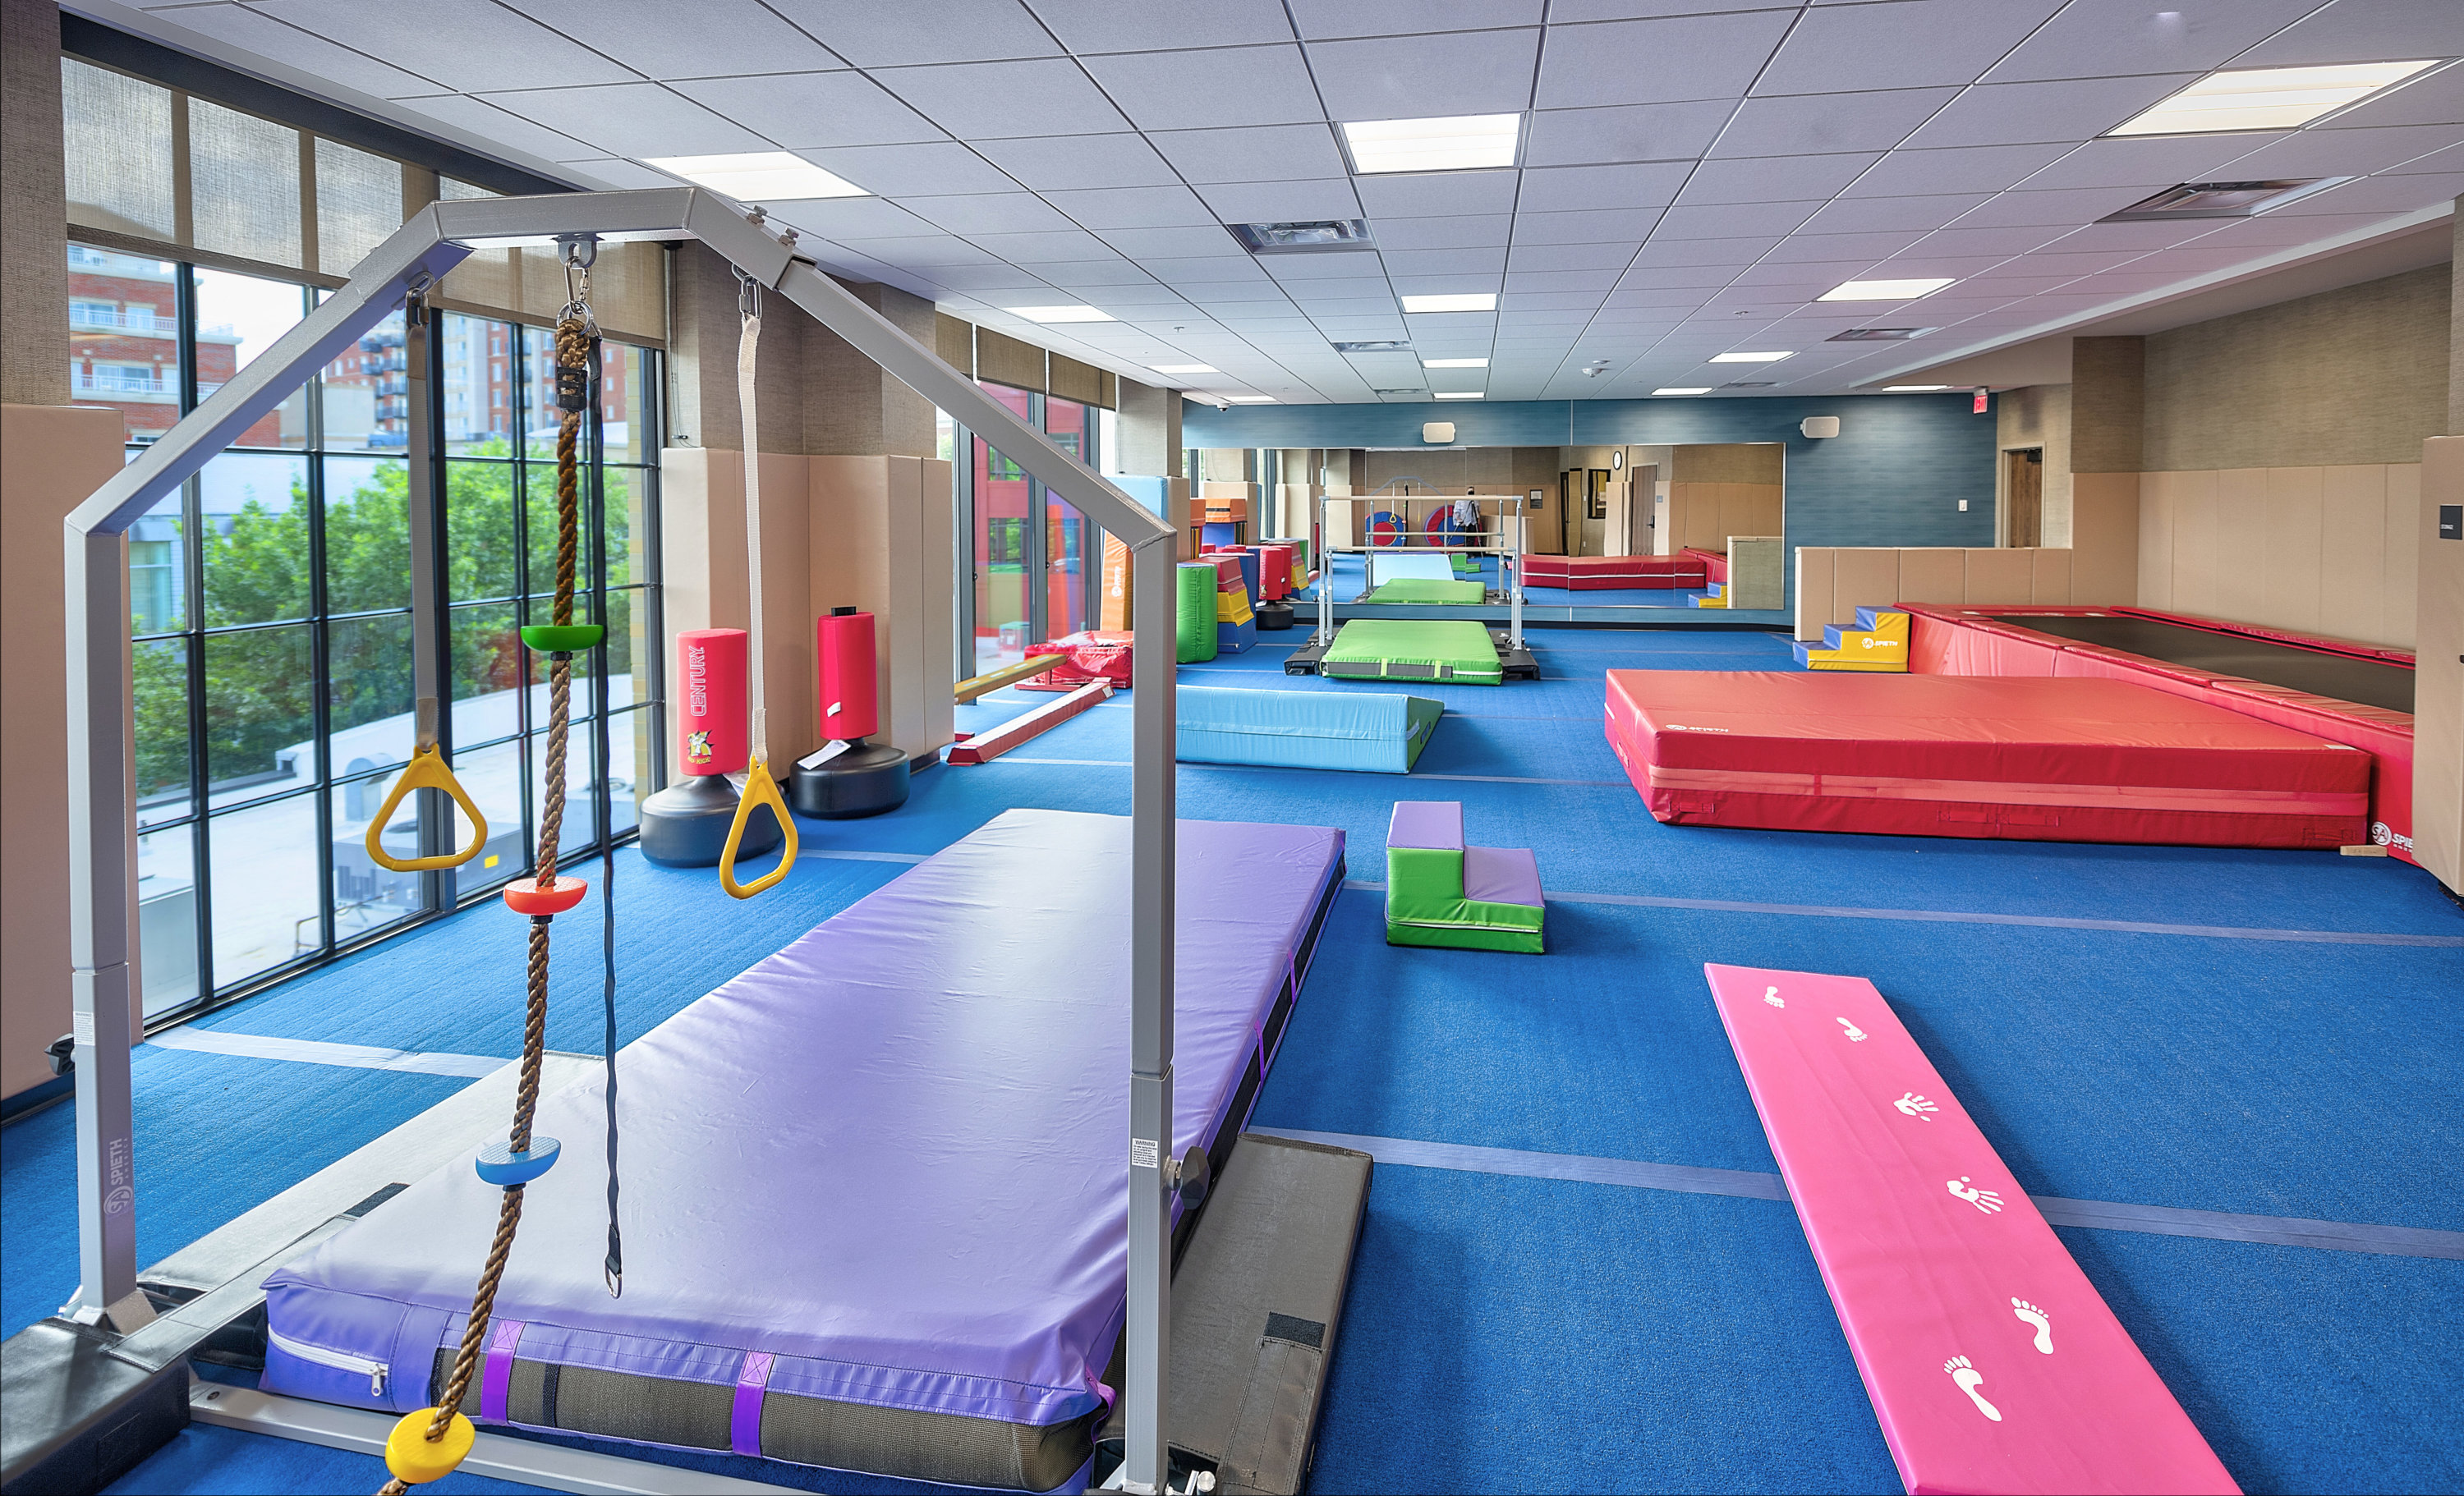 The tumbling area at Kids Academy. Photo by Fredde Lieberman.